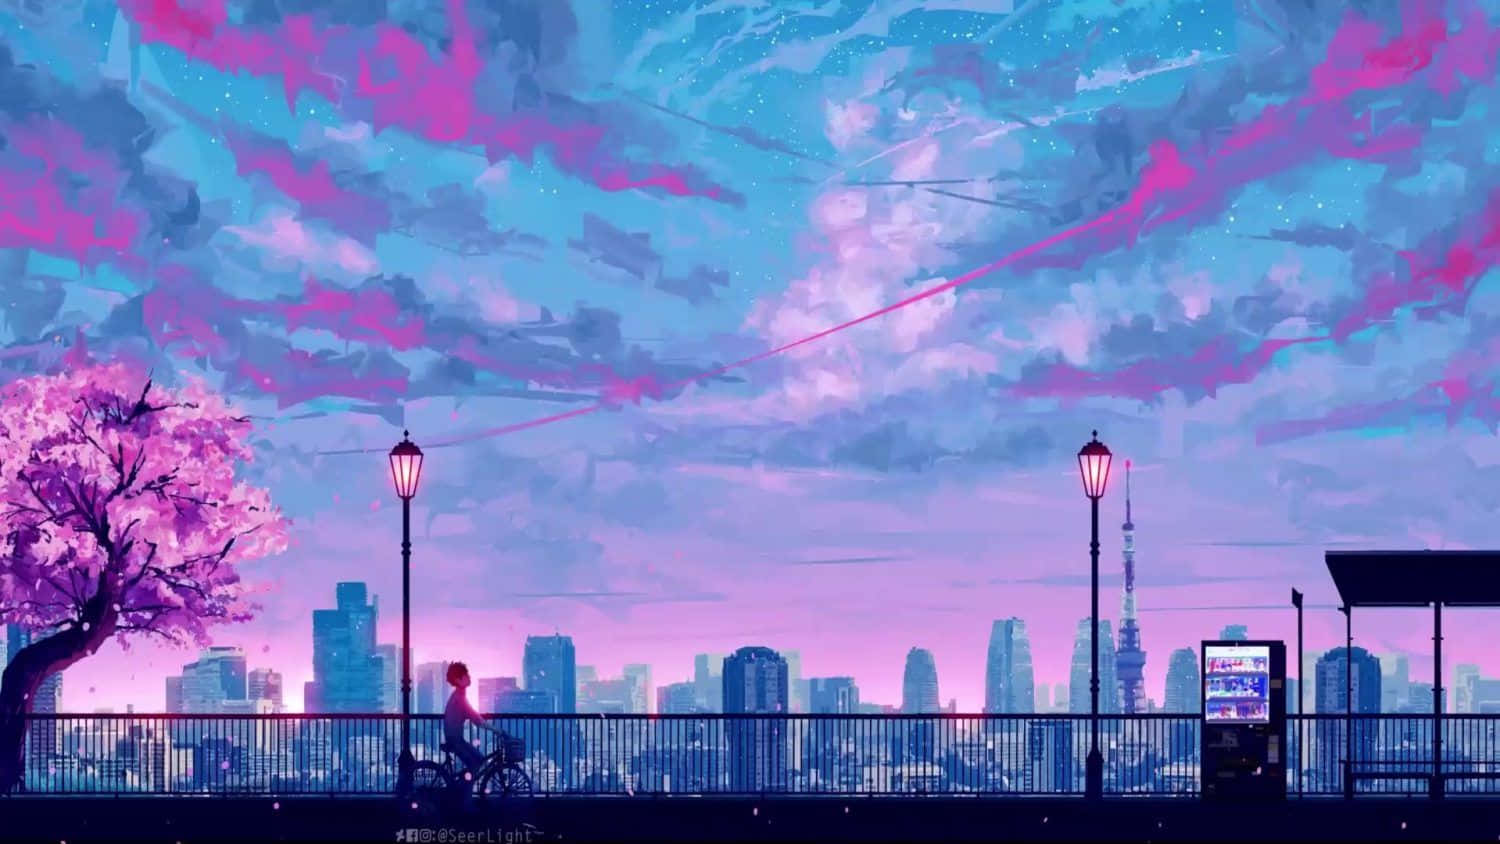 A young girl in an Anime world, the dreamy blues and pinks of her journey.